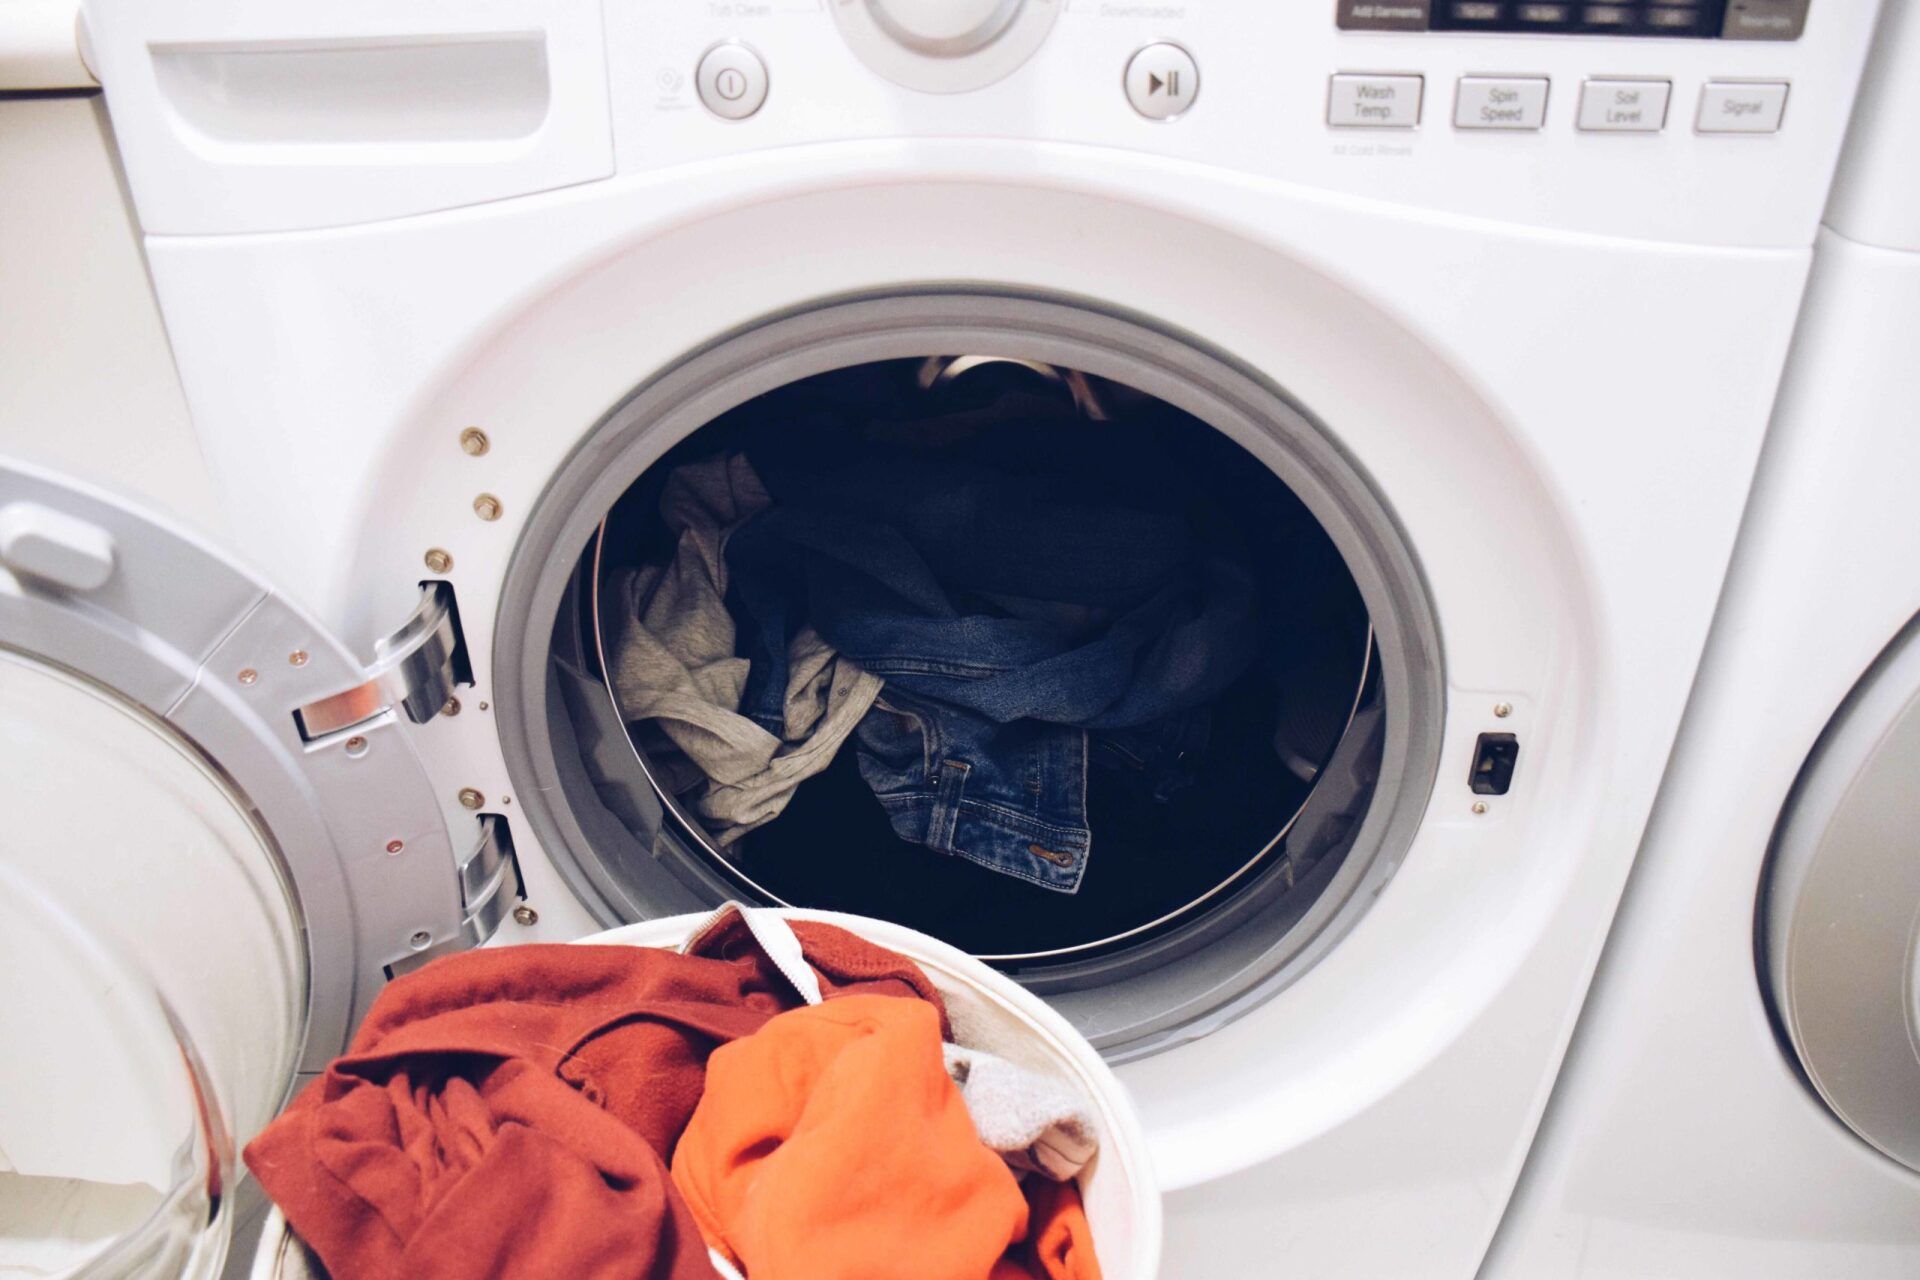 Dryer Repair Services in Milford, PA